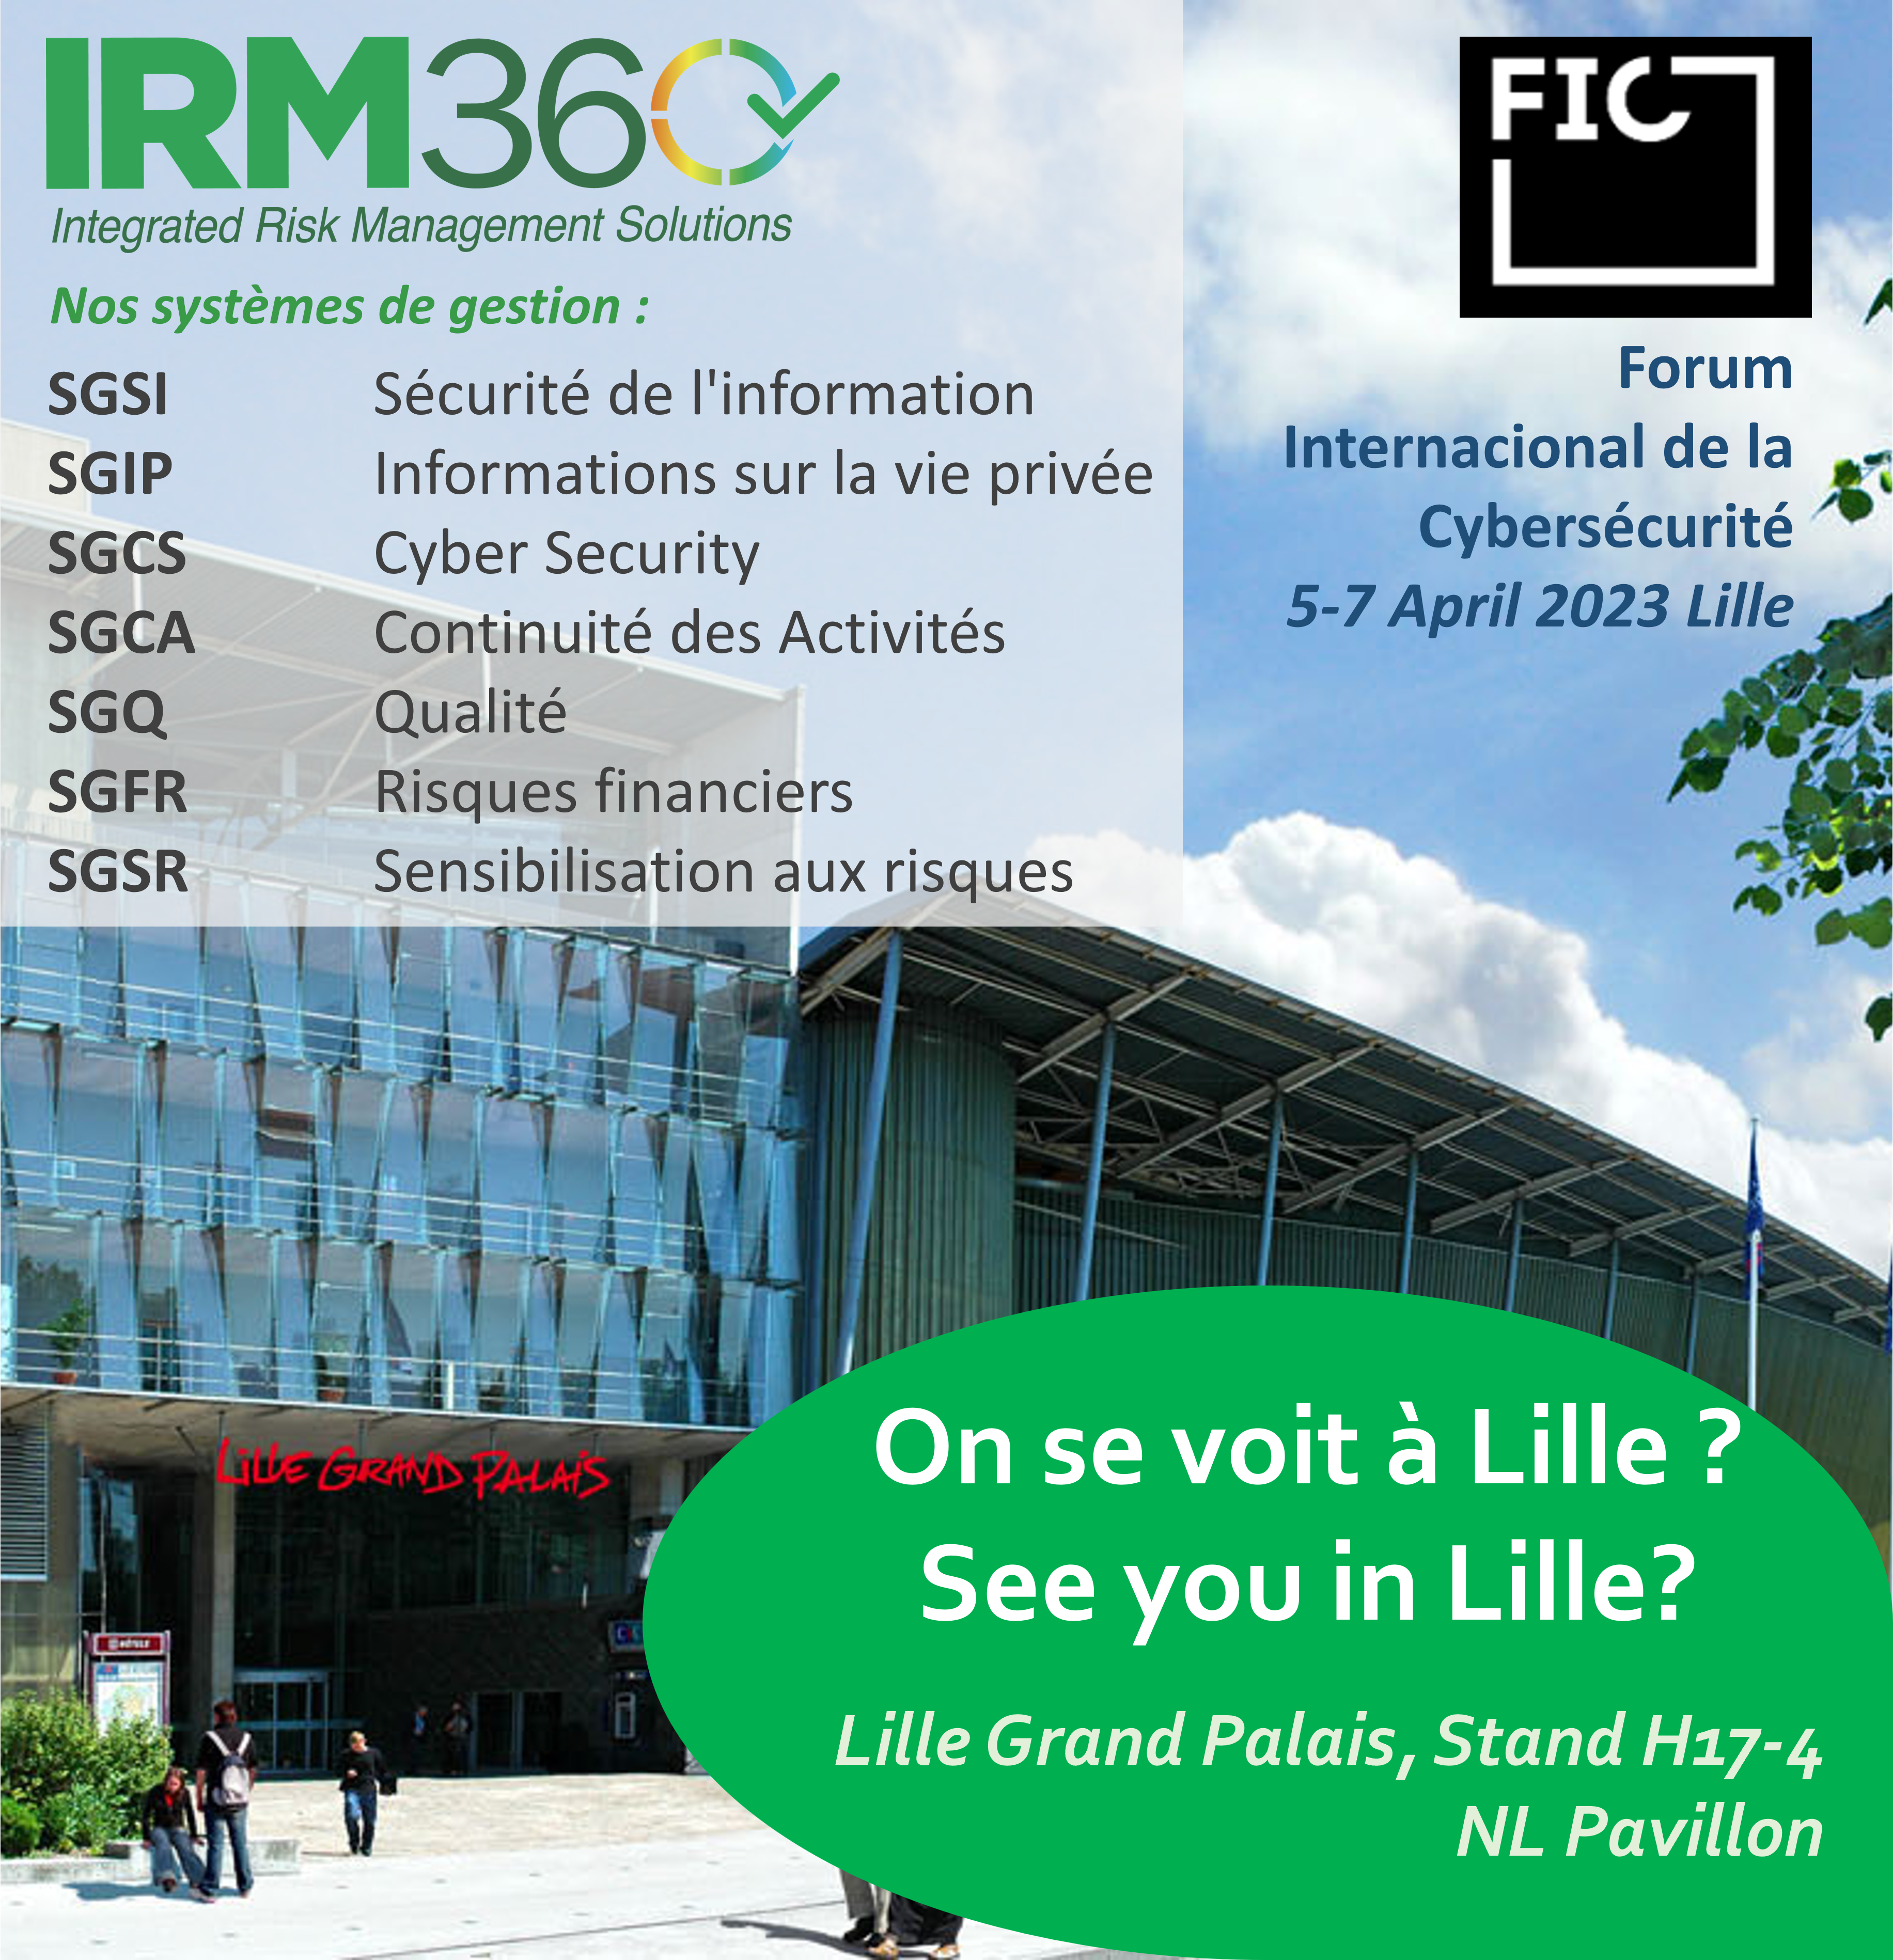 IRM360 w Lille